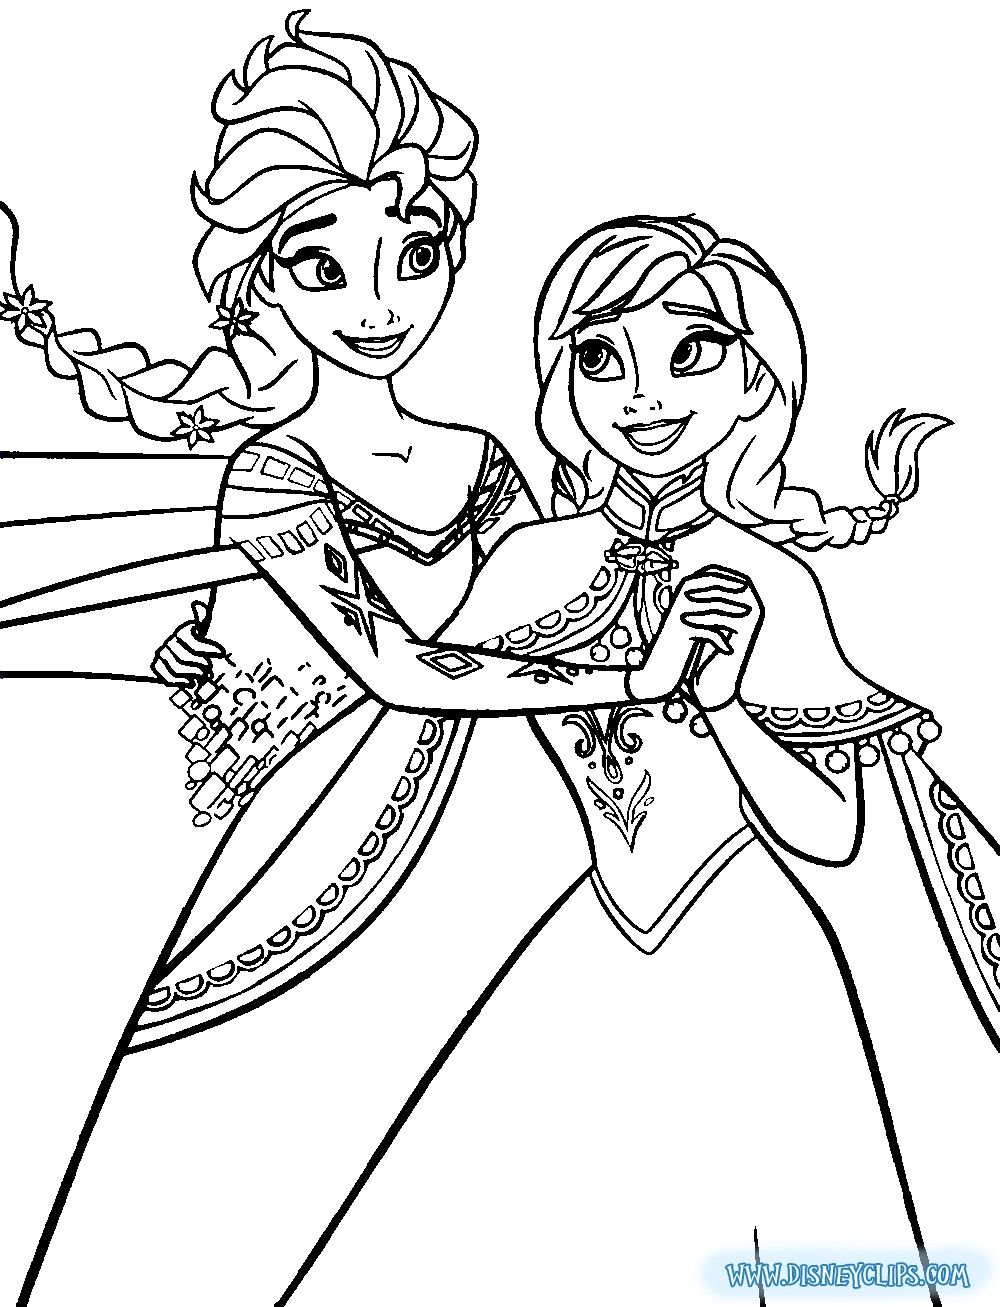 Frozen Elsa And Anna Drawing Image